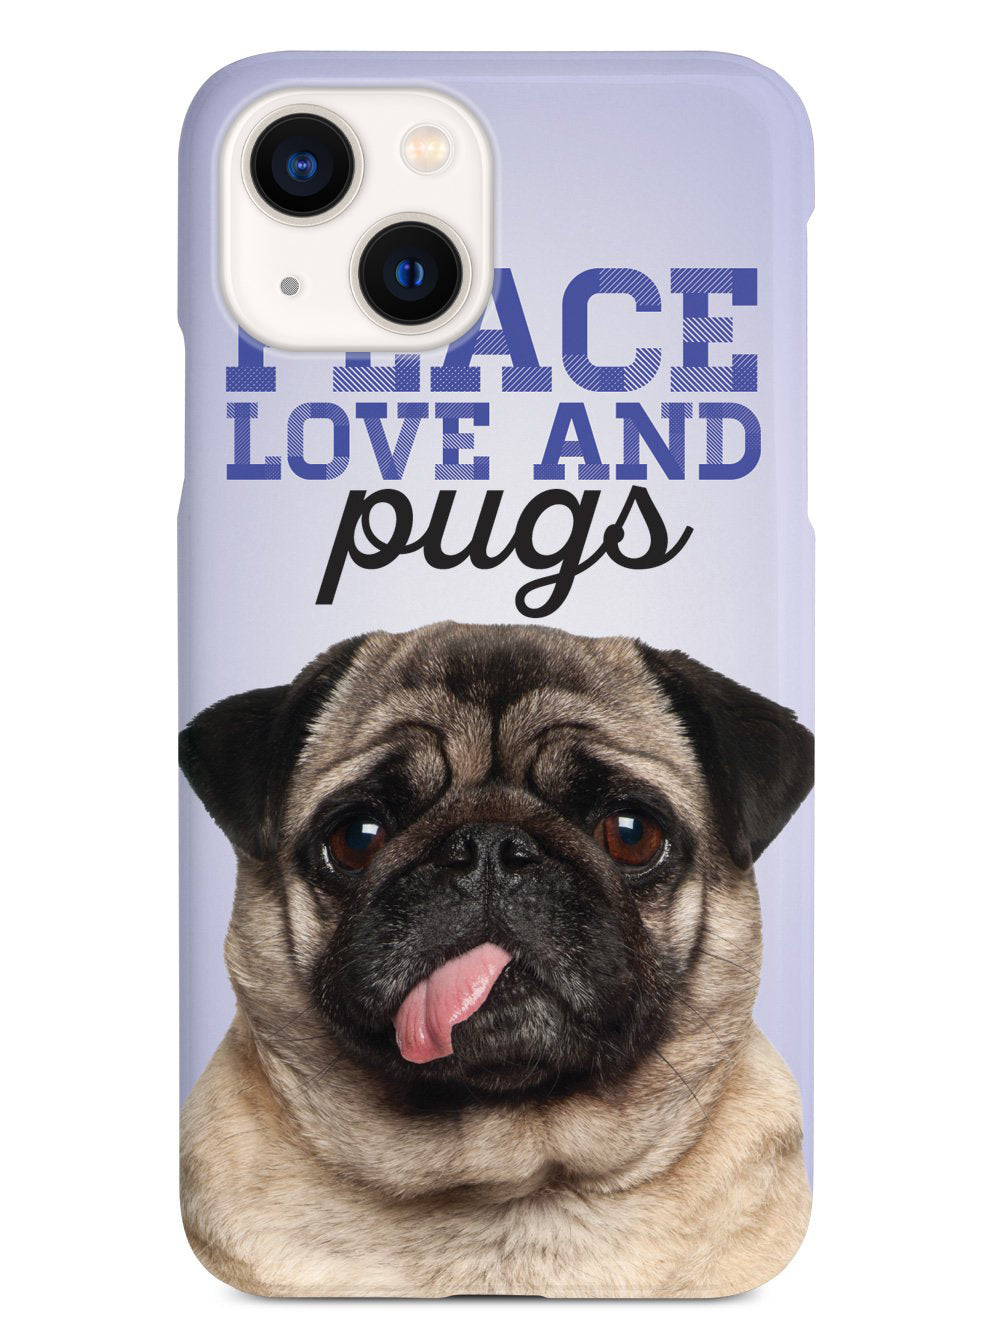 Peace Love and Pugs - Real Life Case